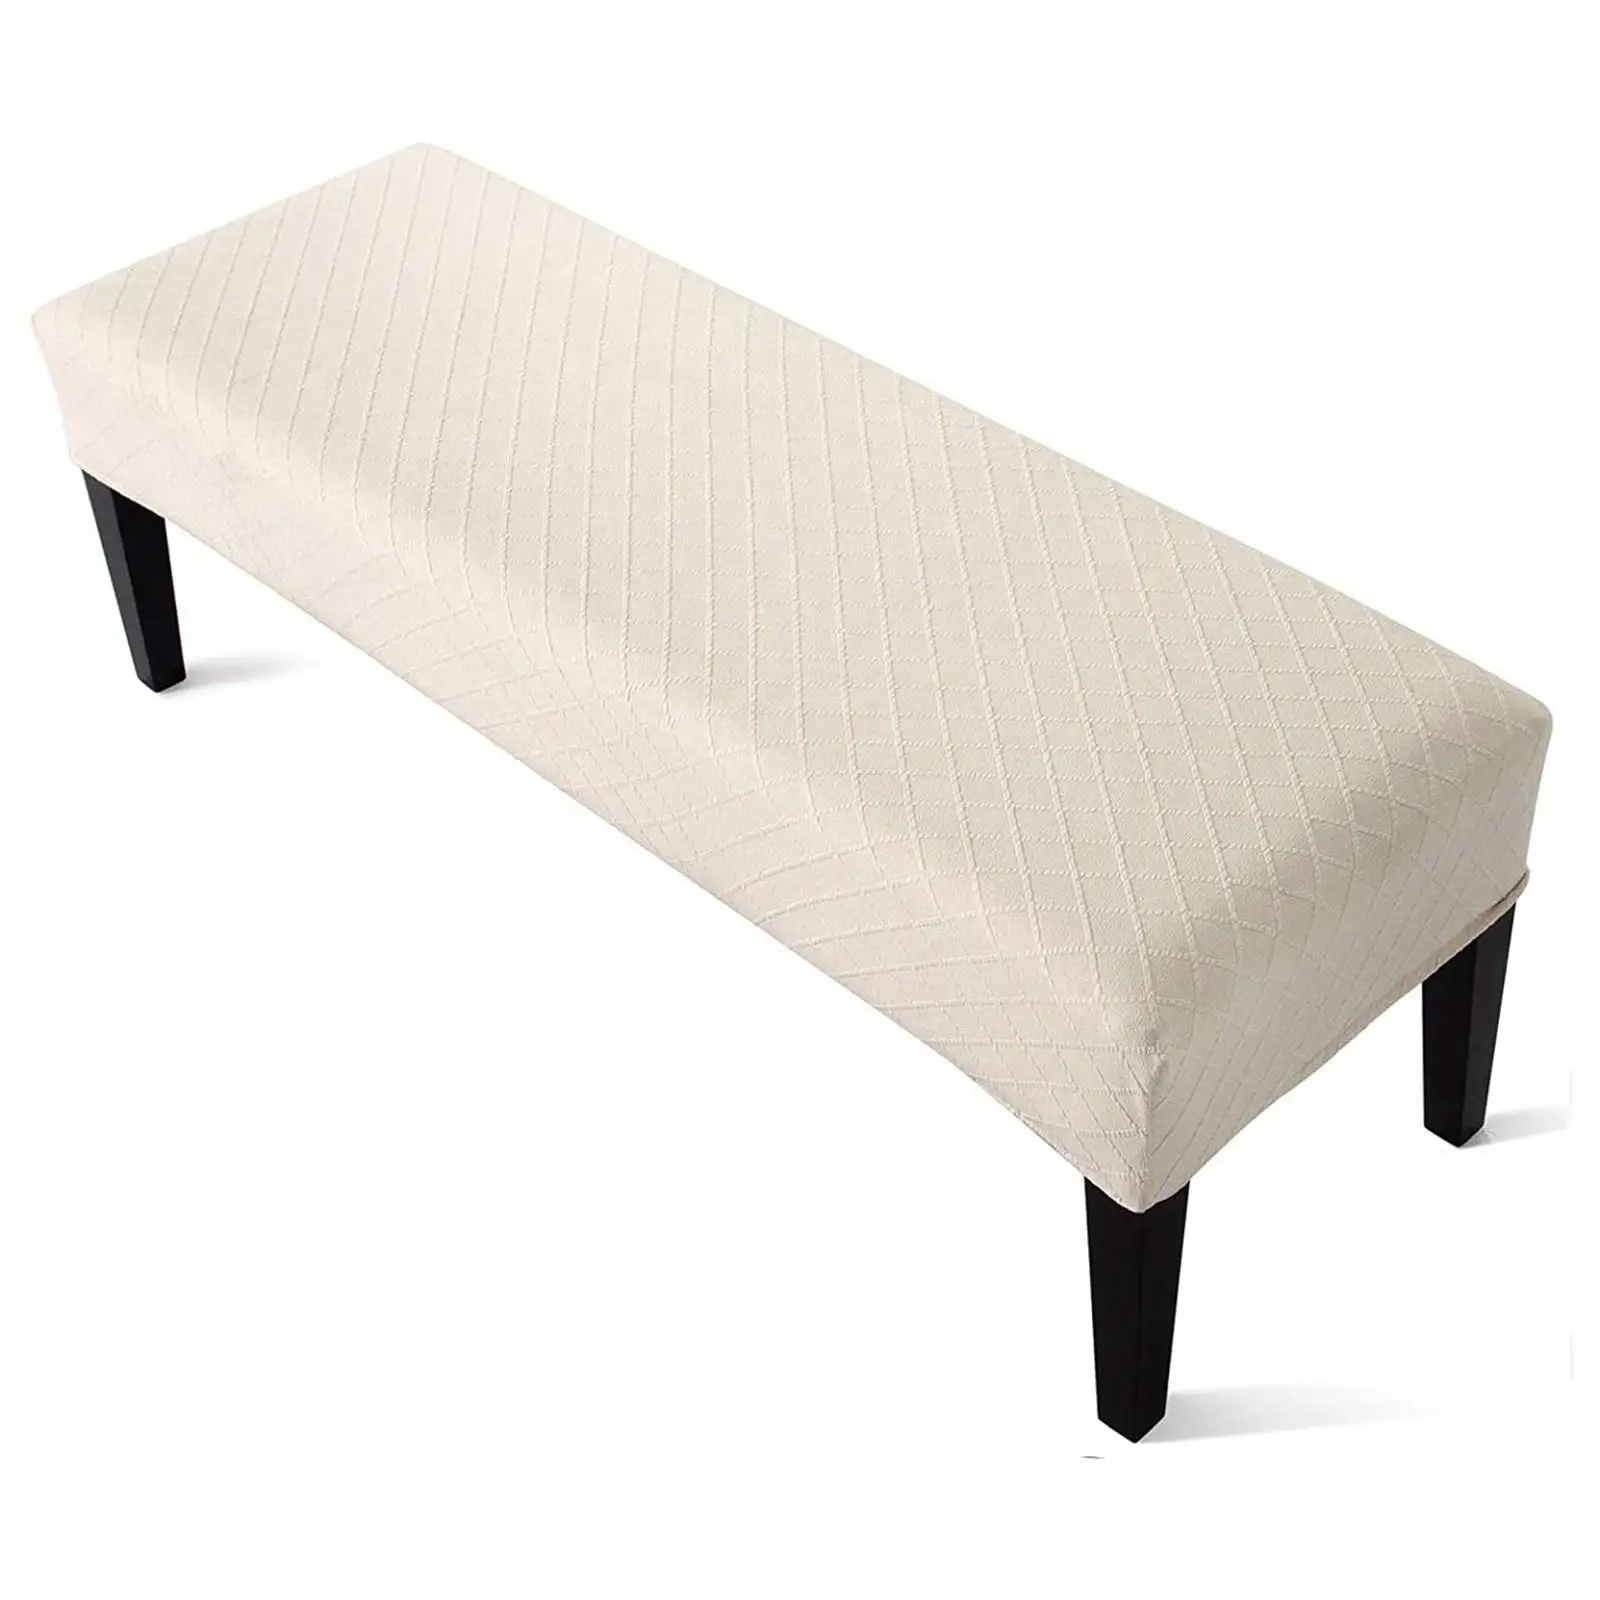 Bench Covers for Dining Room Soft Thick Velvet Bench Slipcover Bed Bench Cover